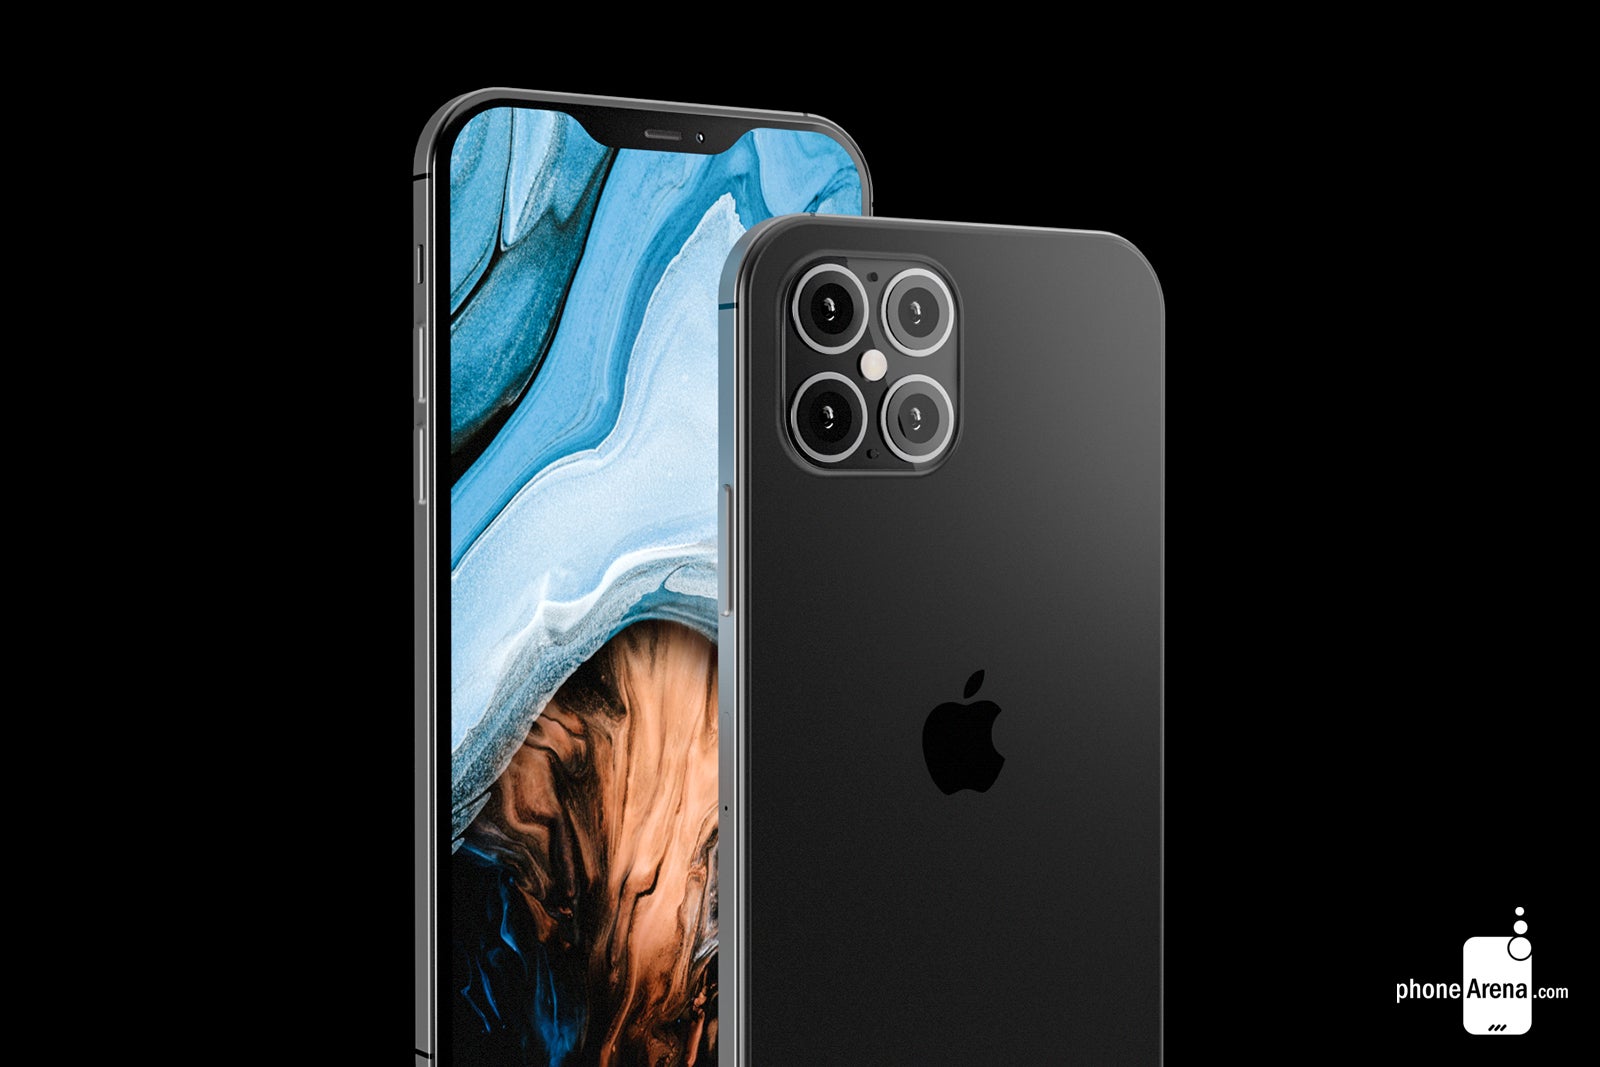 Apple iPhone 12 Pro concept render - Apple's 5G iPhone 12 won't be pushed back to 2021, but future products could be delayed